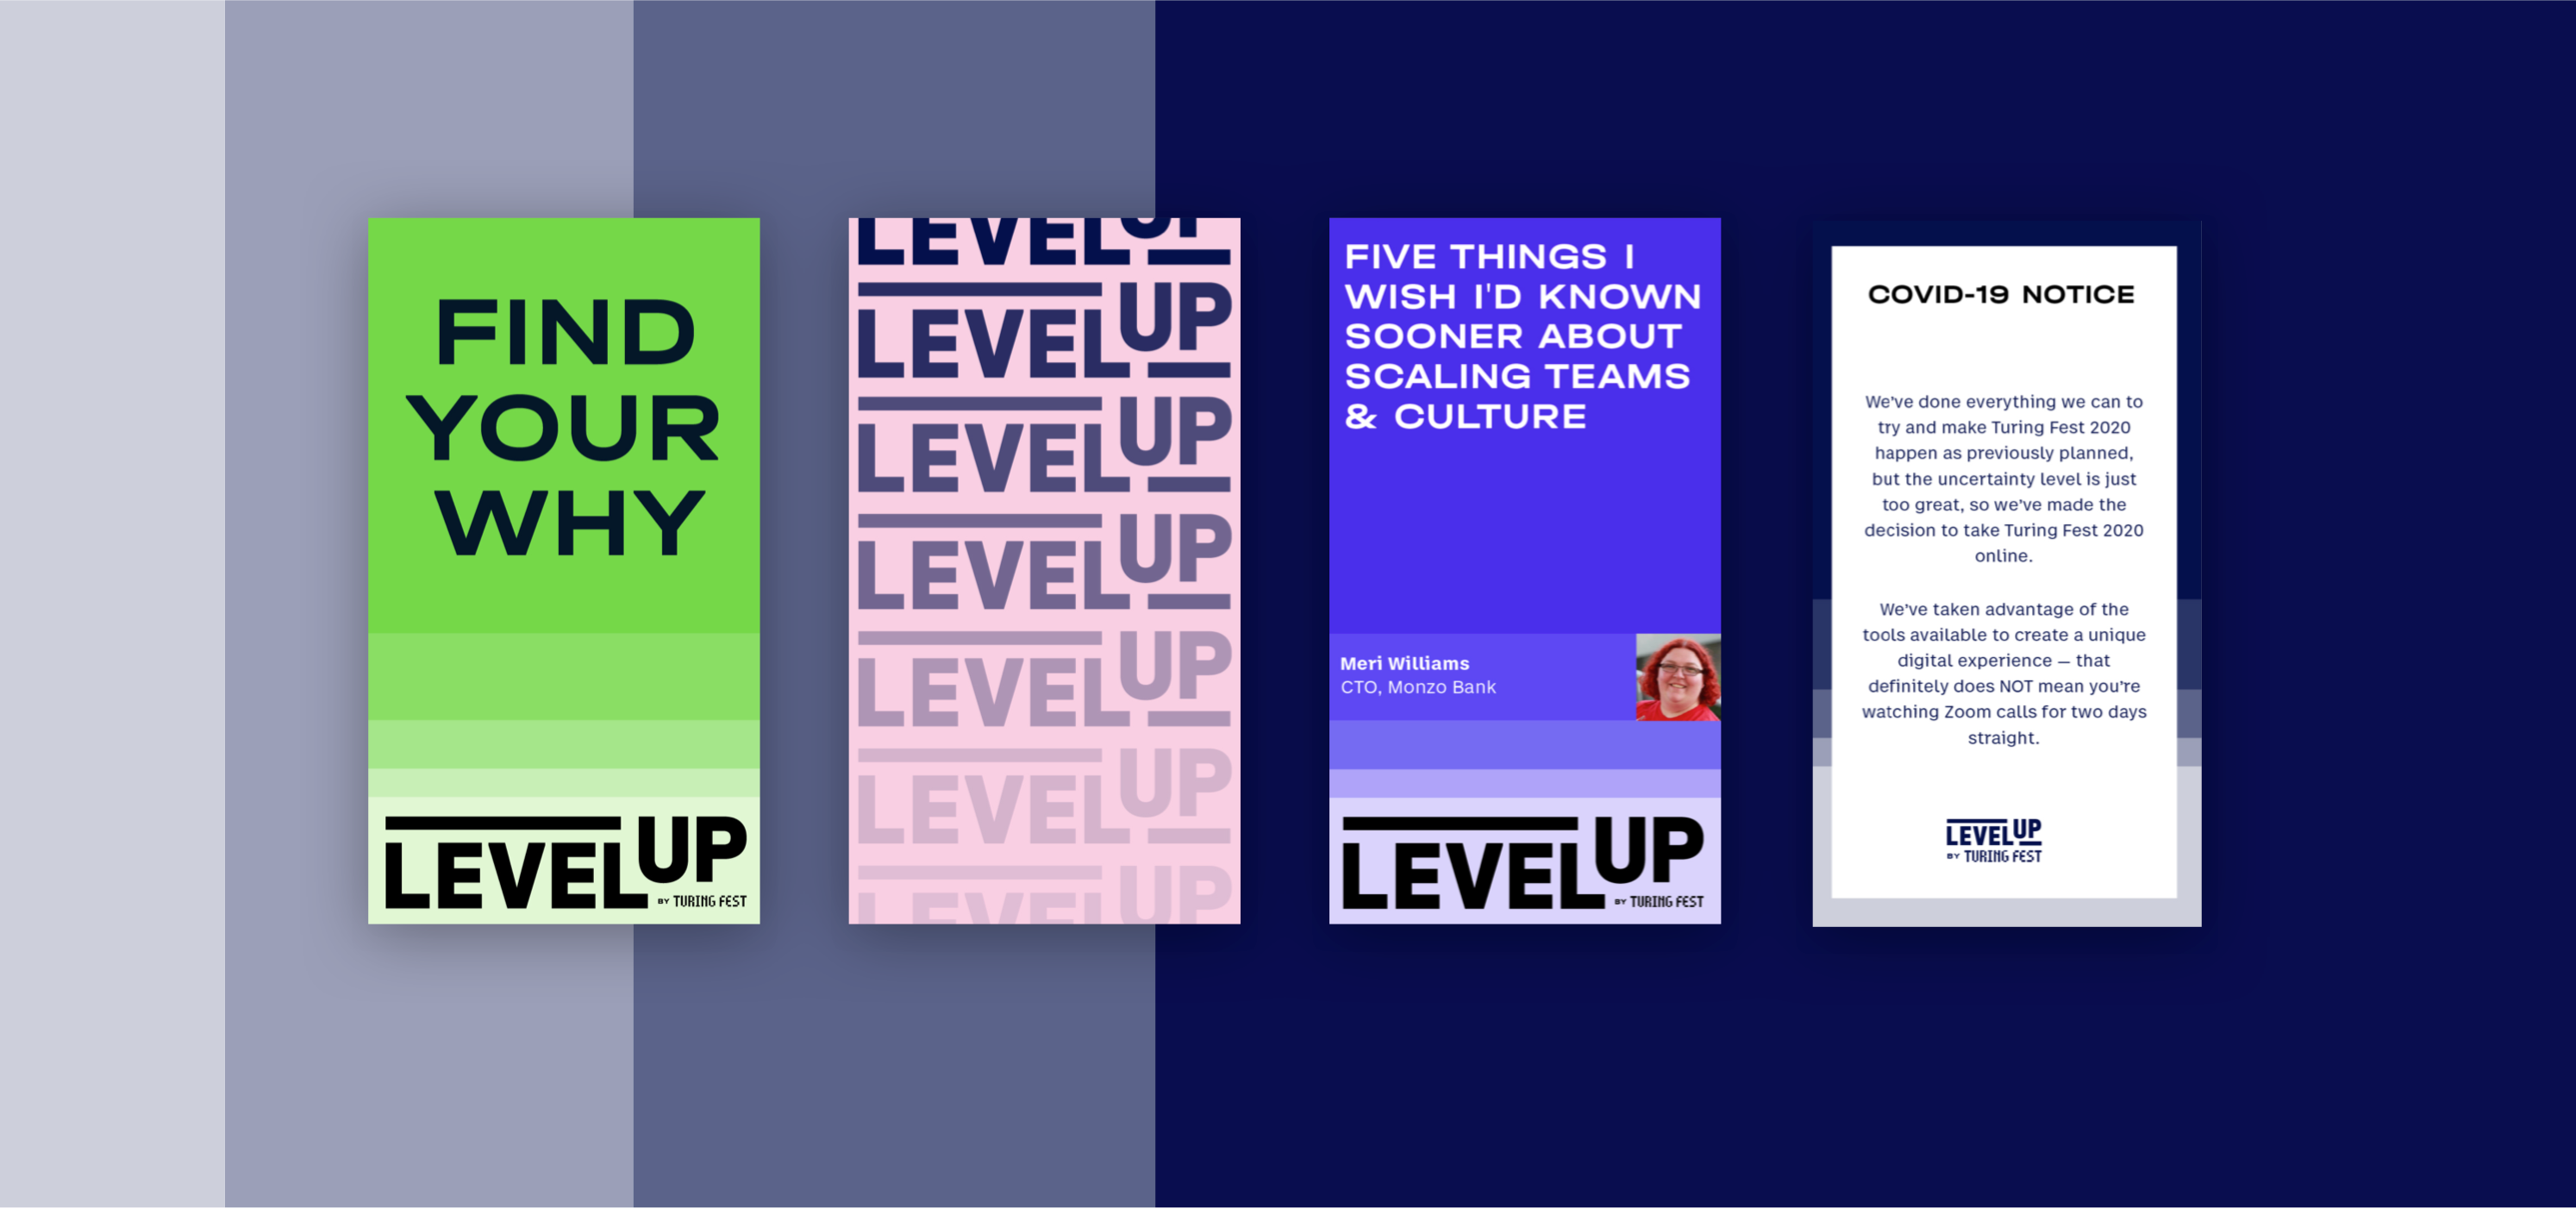 A series of 4 promotional poster designs, laid out in a row. Posters are portrait orientation. First poster has the text “FIND YOUR WHY” in large type across the top, with the Level Up logo across the bottom, on a background of horizontal stripes in a series of shades of green. The second poster has the Level up logo repeated vertically down the height of the poster, in shades of grey, on a pink background. The third poster features a quote and profile picture of Meri Williams (CTO of Monzon Bank), on a Purple striped background. Quote text is: “Five Things I Wish I'd Known Sooner About Scaling Teams & Culture”. The final poster is an example of a COVID 19 poster, stating that as a precaution the event has been taken online.